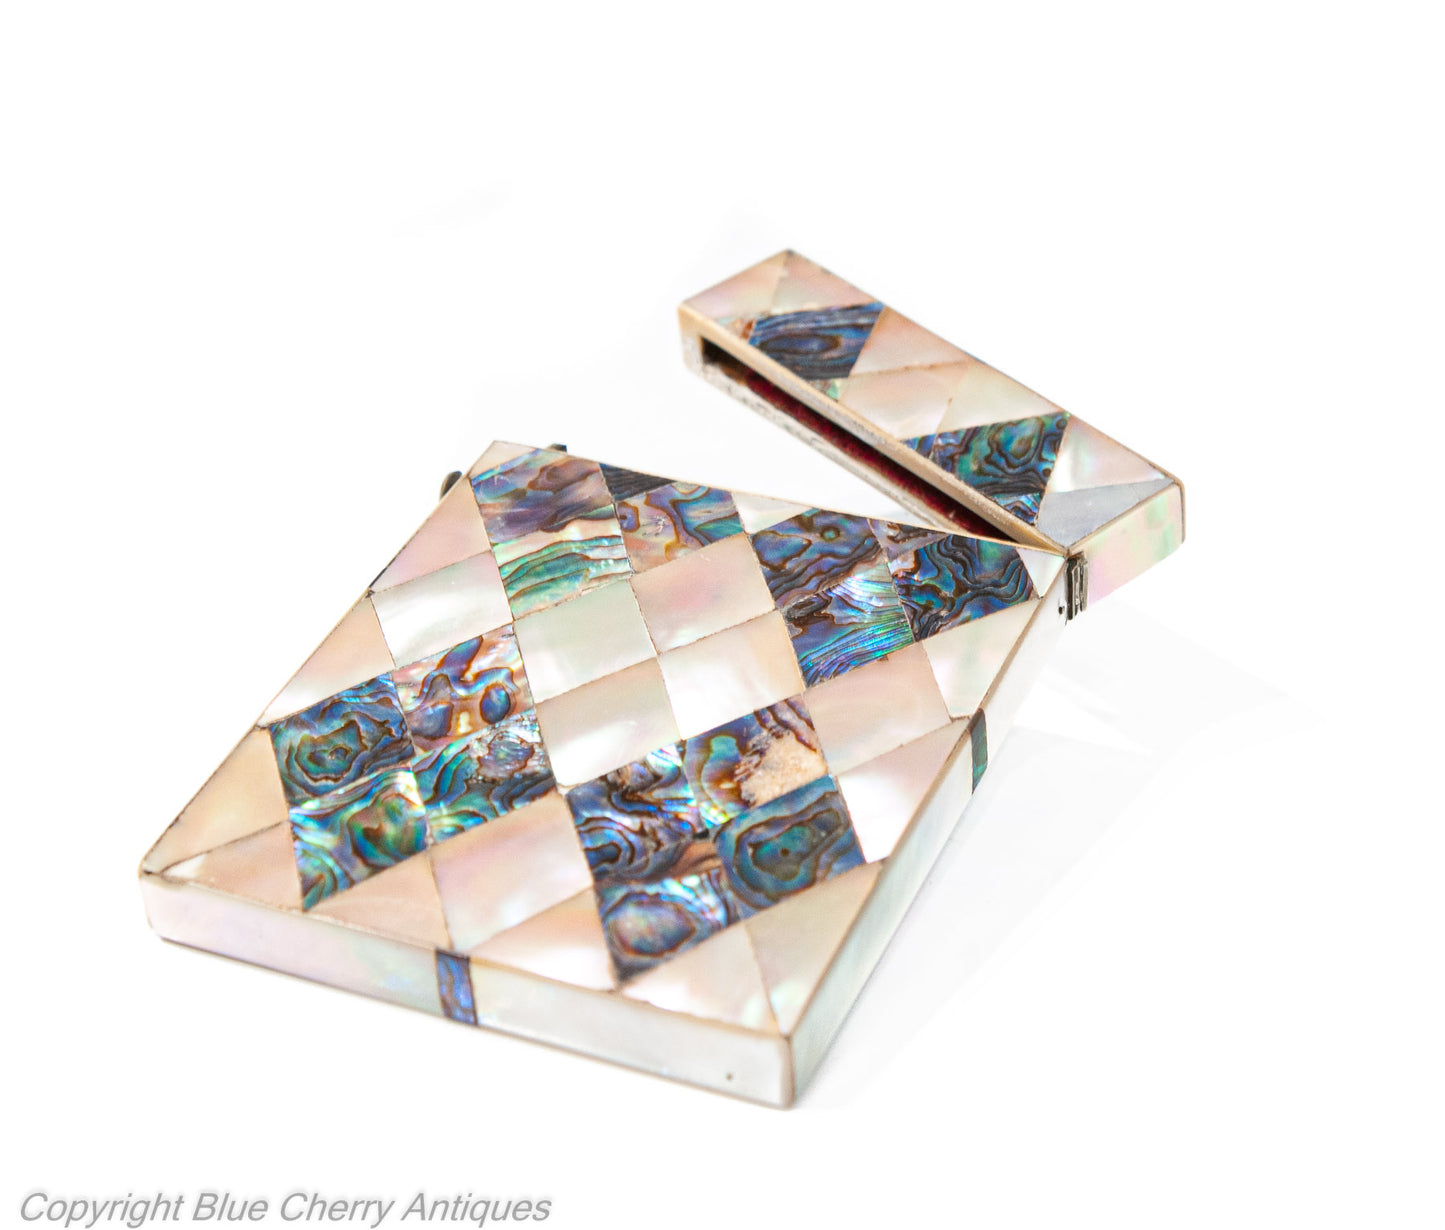 Antique Mother of Pearl & Abalone Shell Victorian Calling Card Case c1860 (Code 1932)